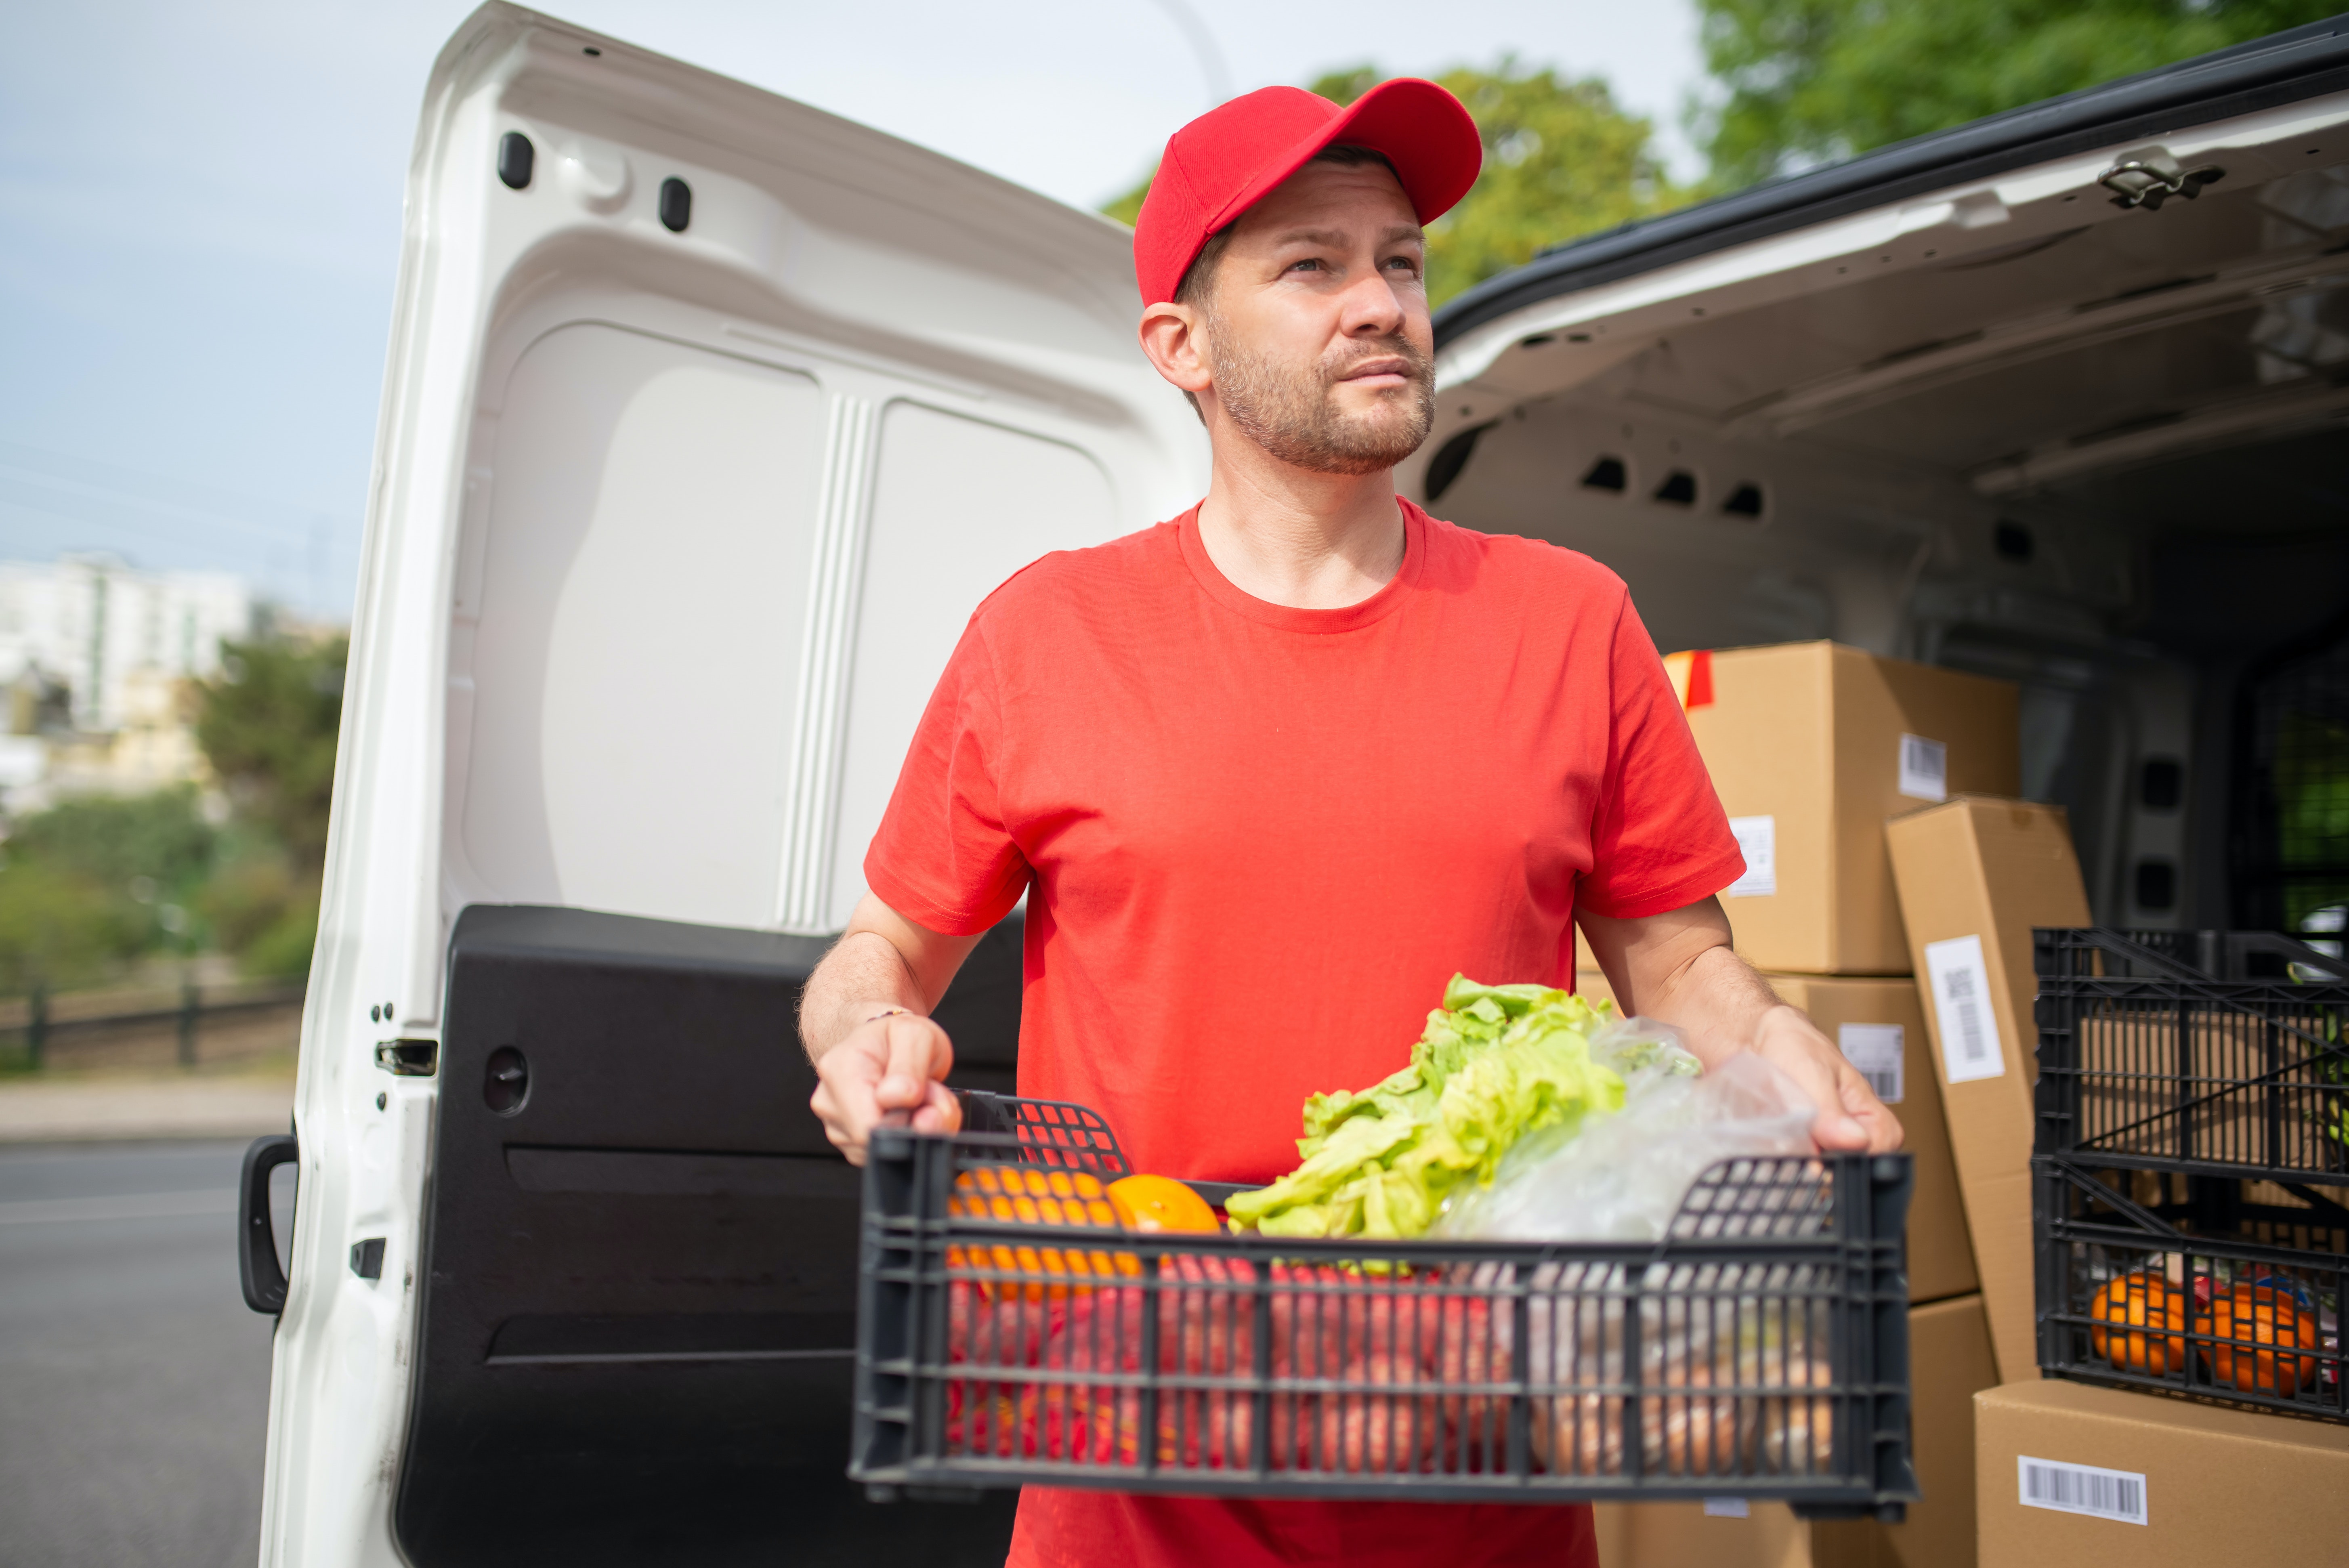 A man in a red t-shirt and hat carrying a box of groceries